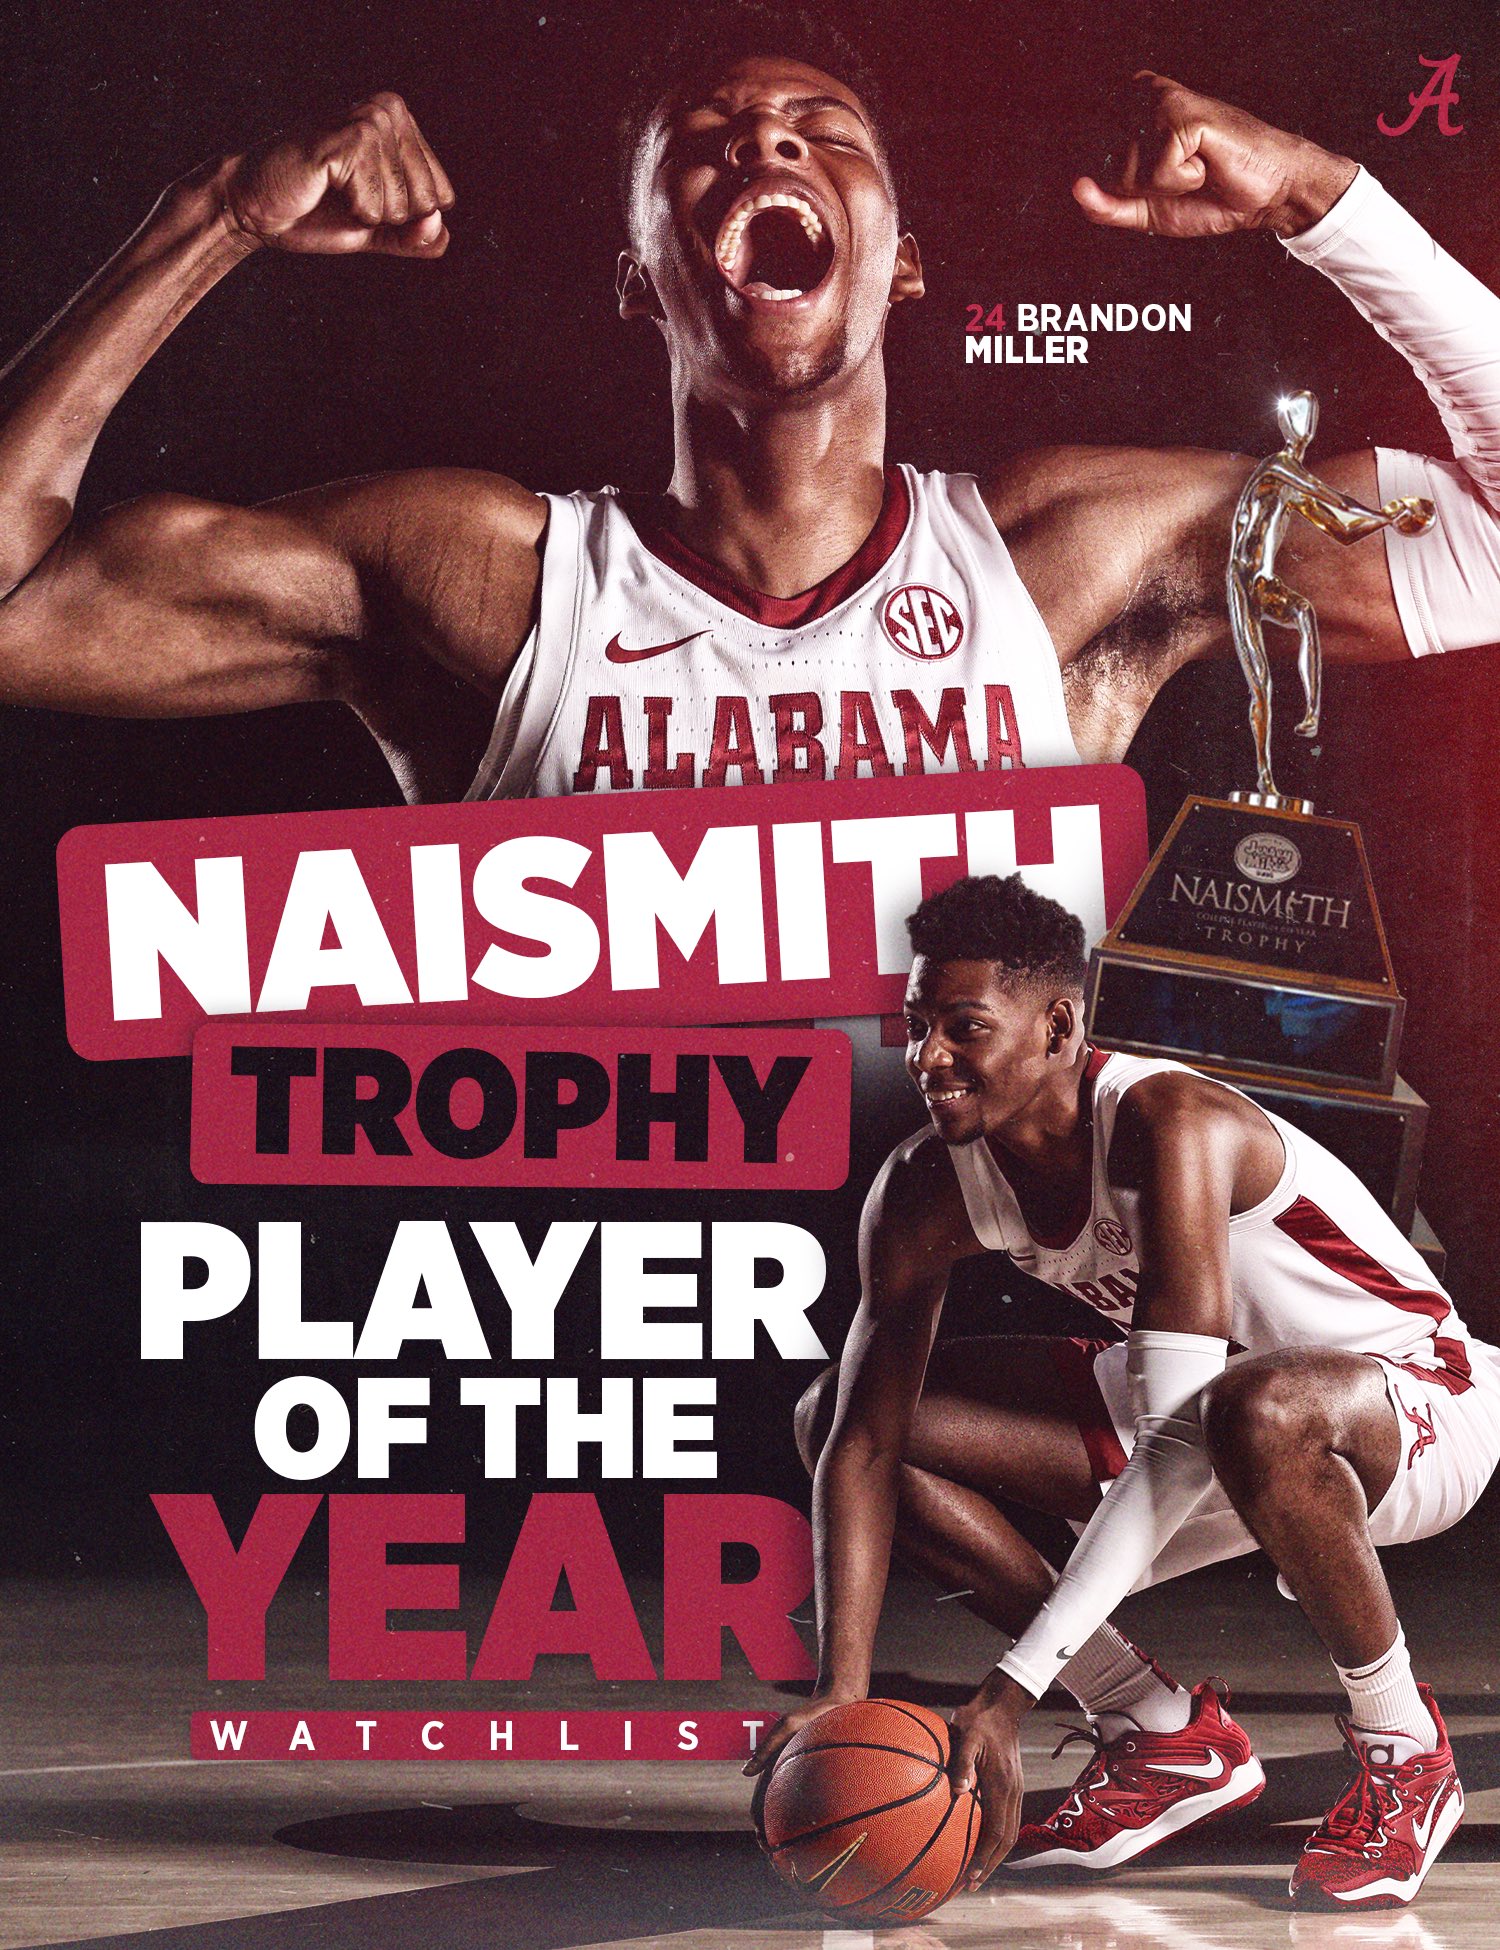 Alabama Men's Basketball on X: 𝑬𝒍𝒊𝒕𝒆 𝑪𝒐𝒎𝒑𝒂𝒏𝒚 🏀 Brandon Miller  has been named to the 2023 Jersey Mike's Naismith Trophy Preseason Watch  List! #RollTide